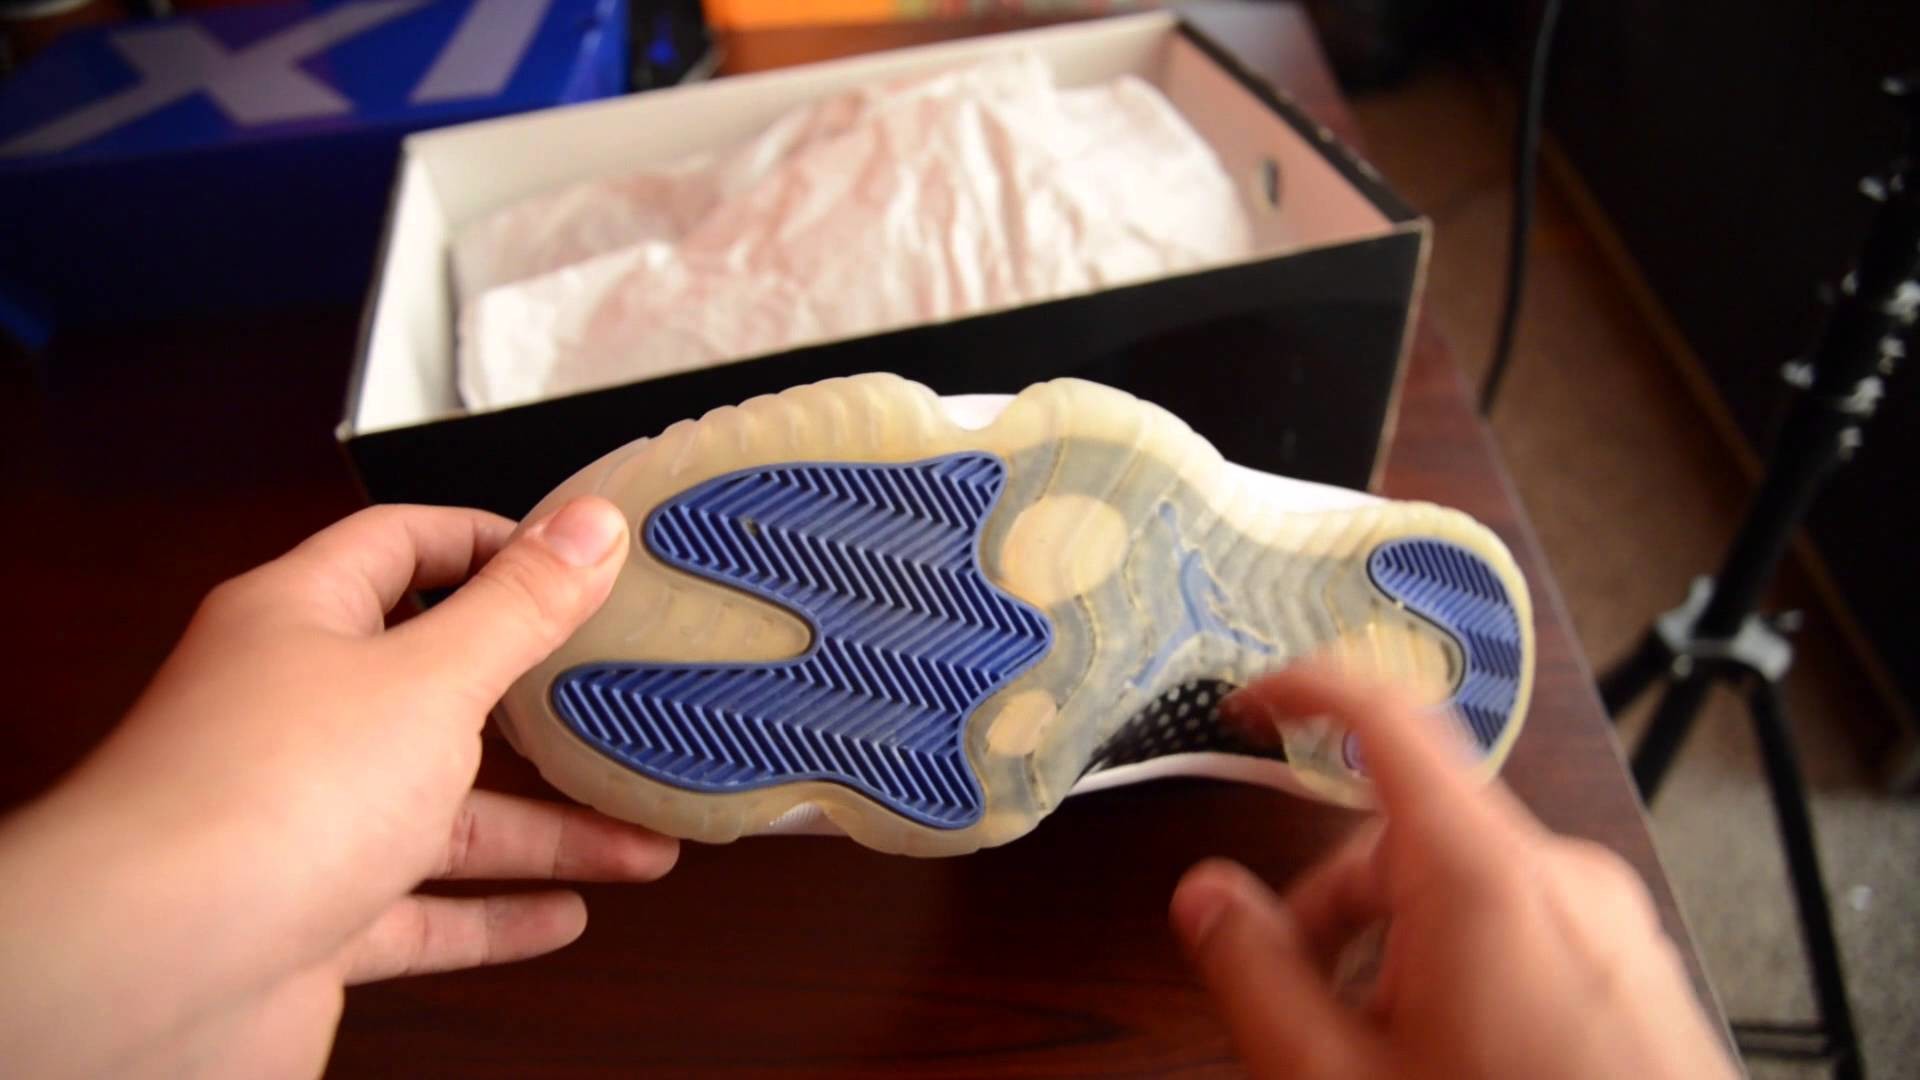 1920x1080 SneakerCon Chicago 2014 Pick Up: Air Jordan 11 Space Jam (Xl) Retro 2009  Unboxing/Overview/Review - YouTube